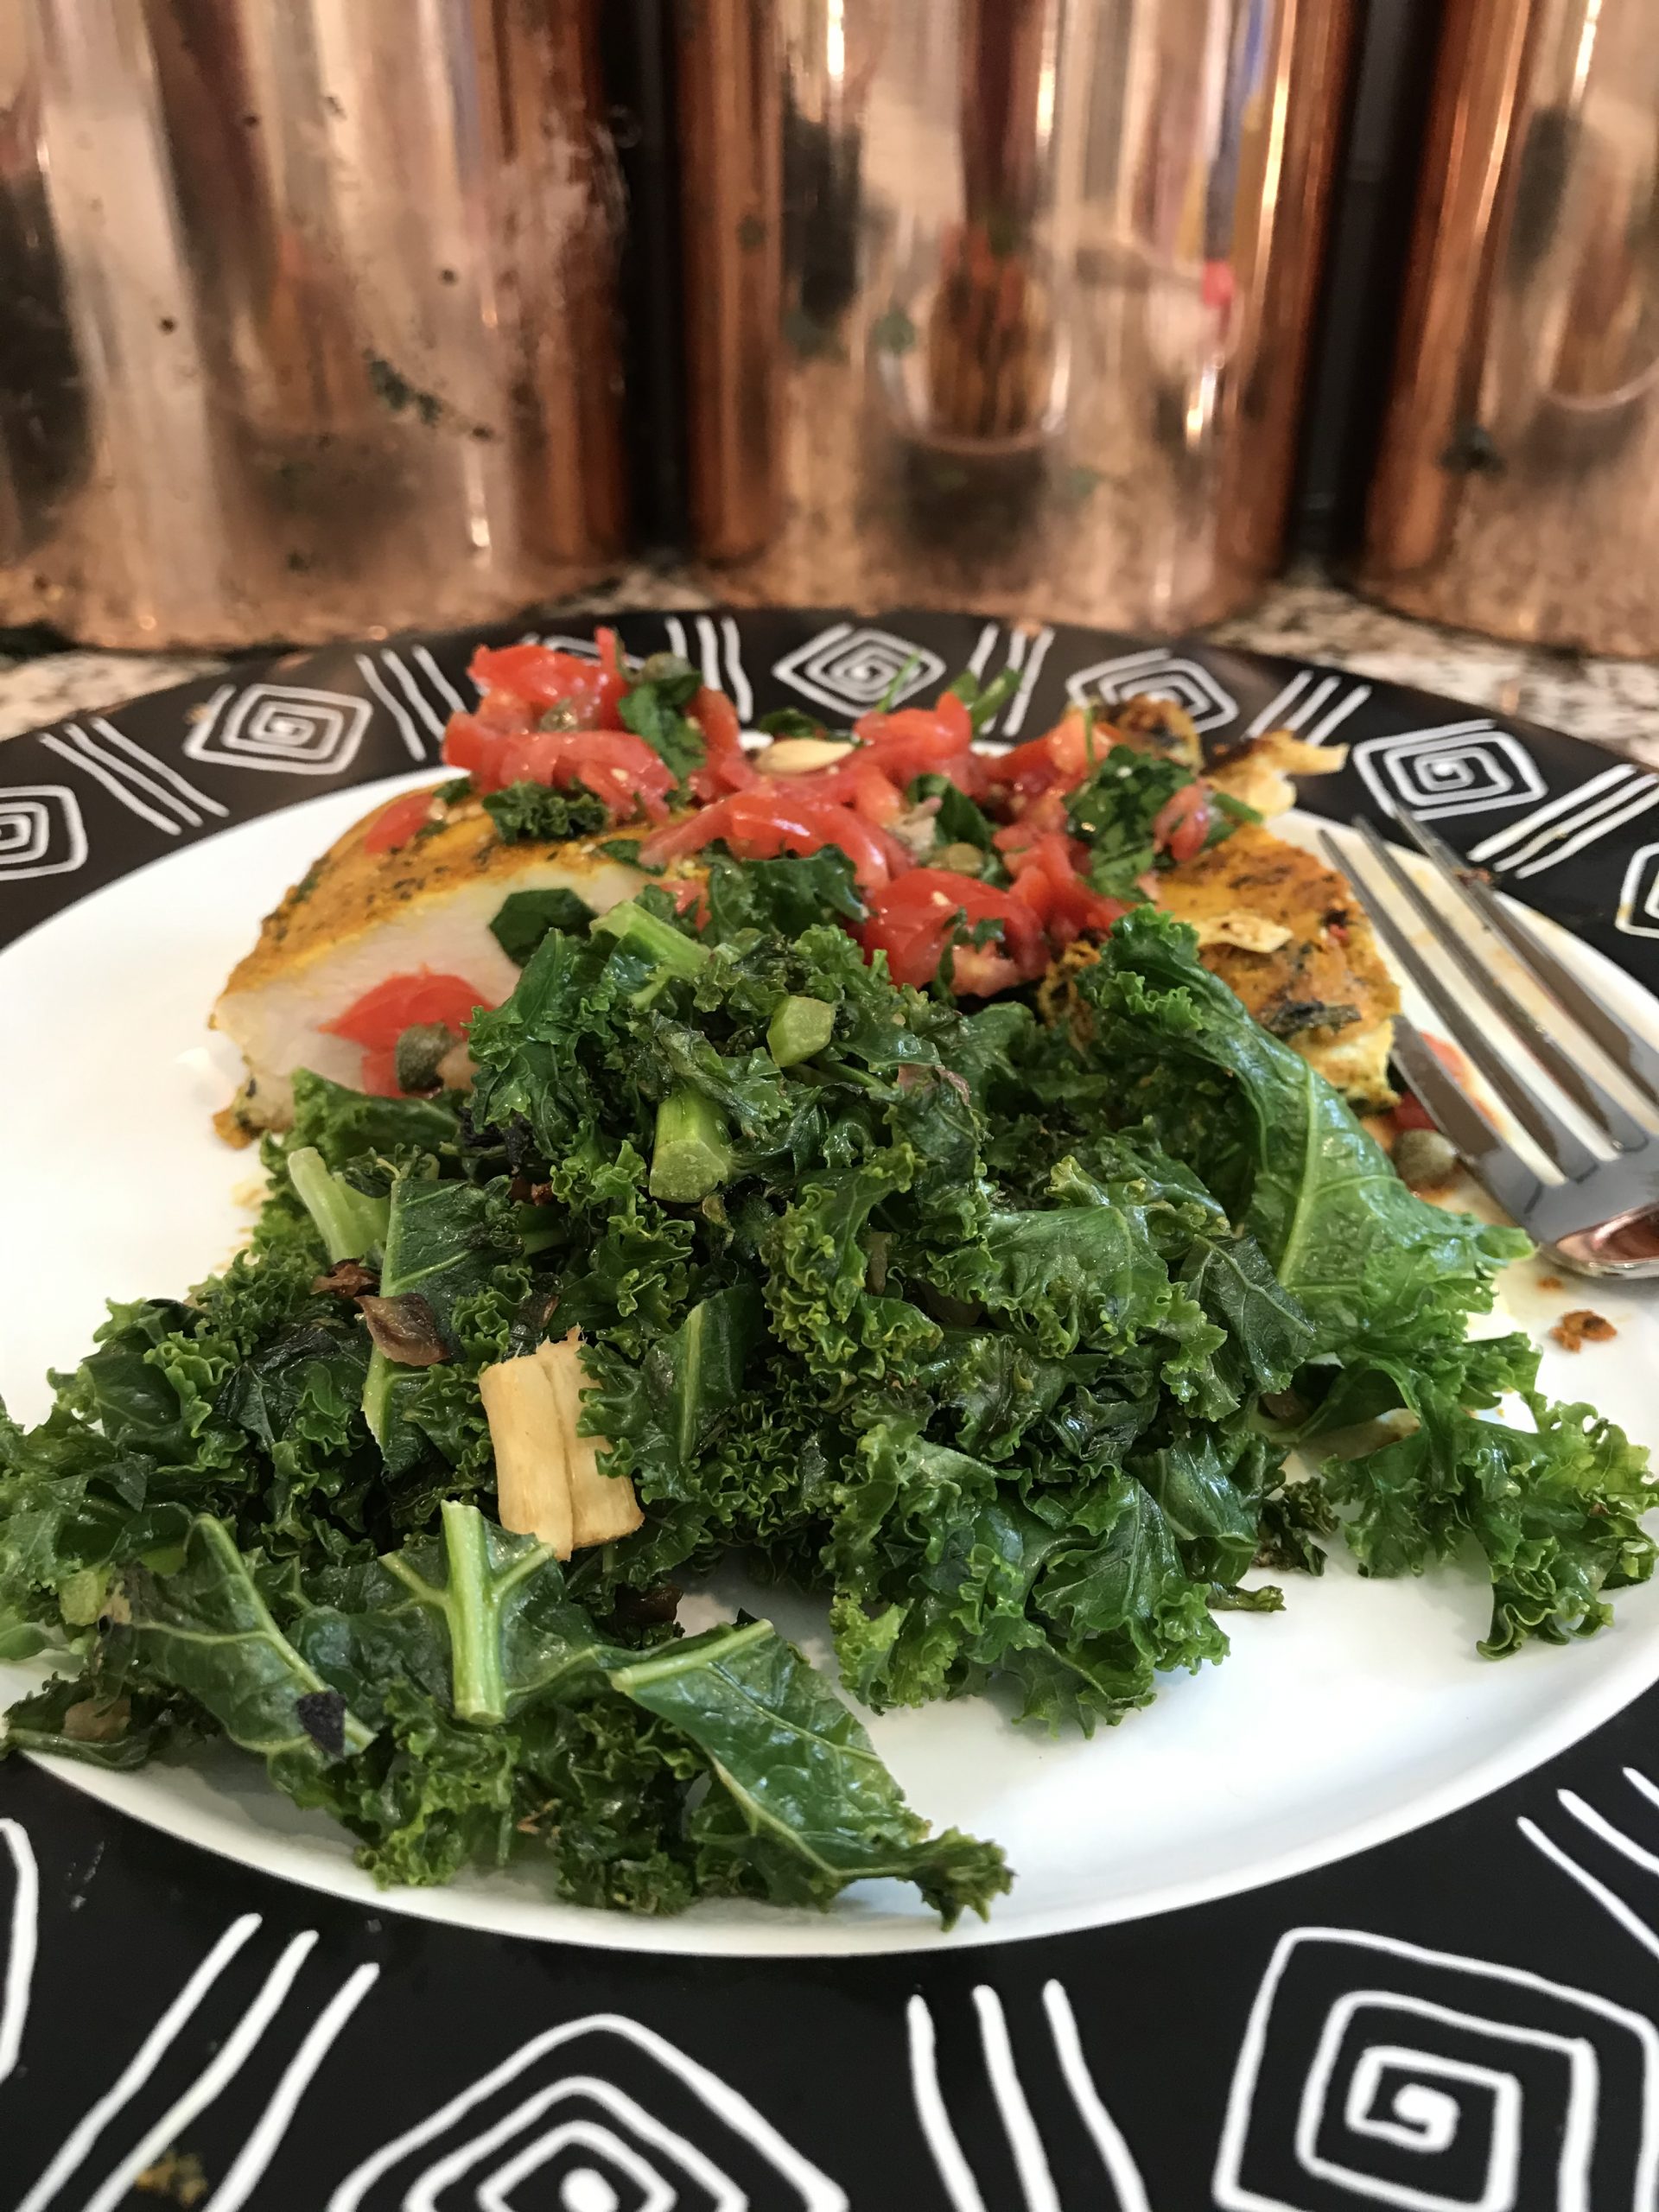 On season 2, episode 1 of The Mom Who Can't Cook show, Catenya McHenry cooks Aromatic Chicken breast with kale, red onions, and a tomato and chili salsa from The SirtFood Diet cook book.